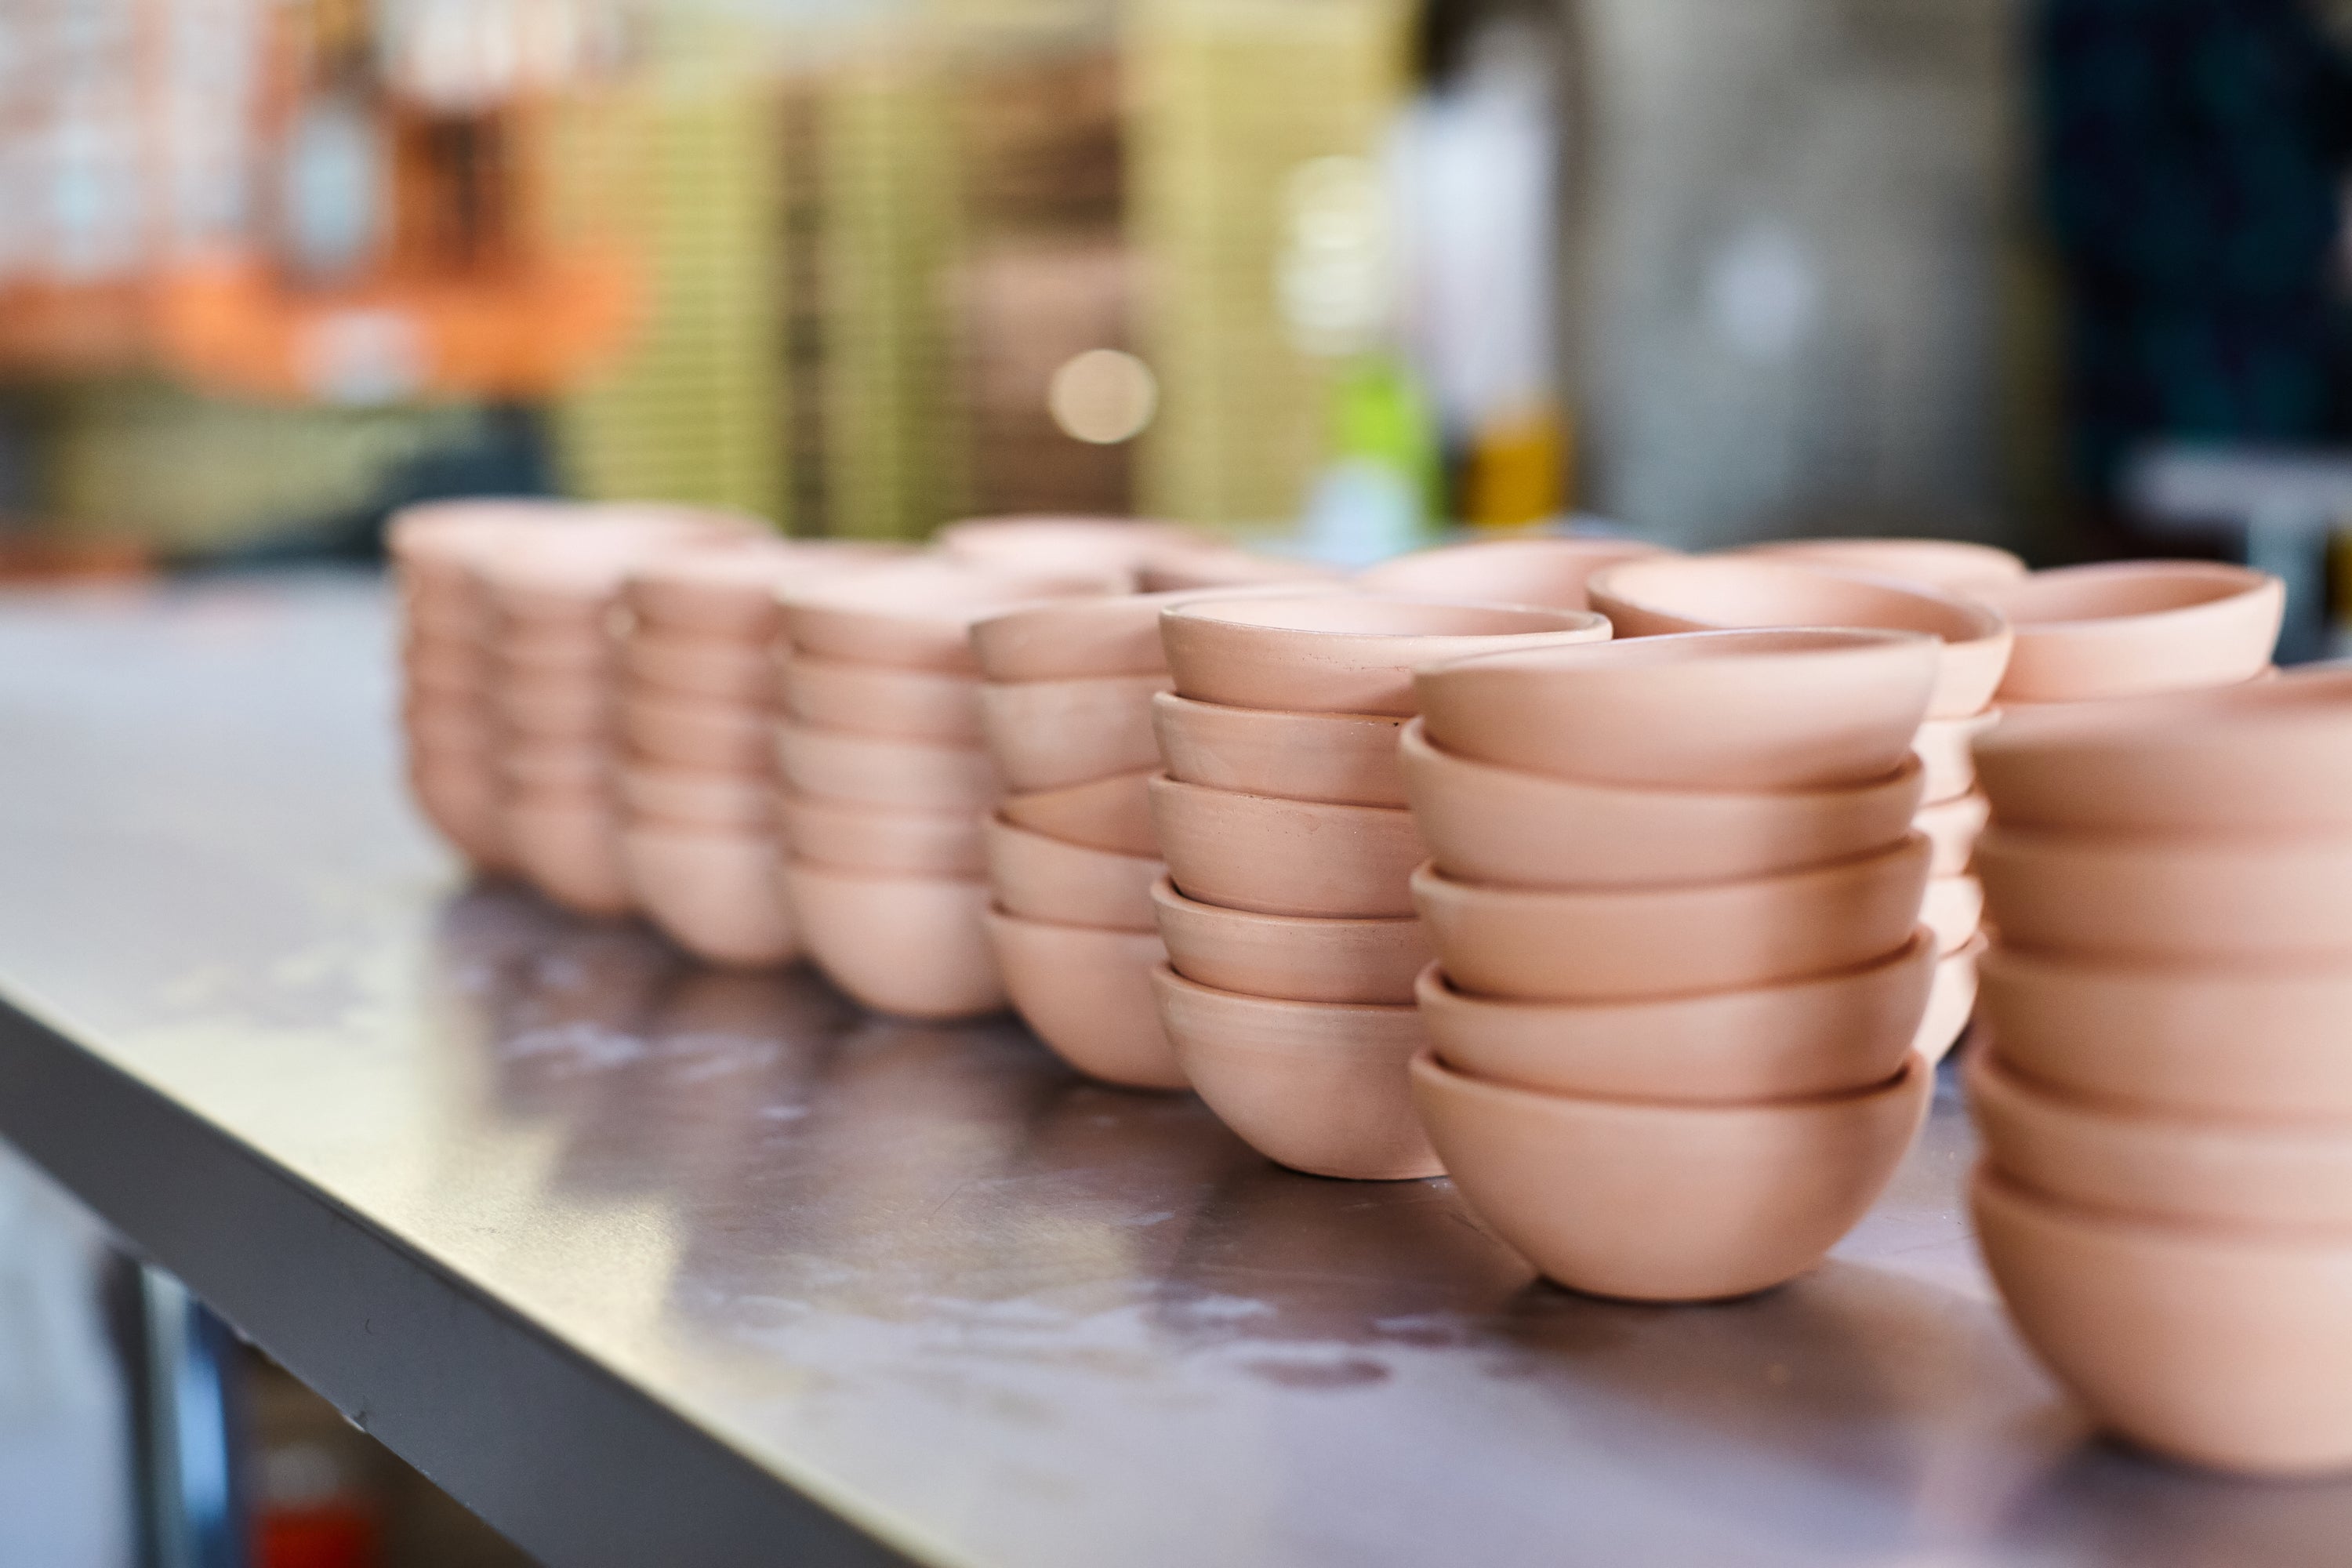 Stacks of unglazed East Fork bowls in a row on a metal table